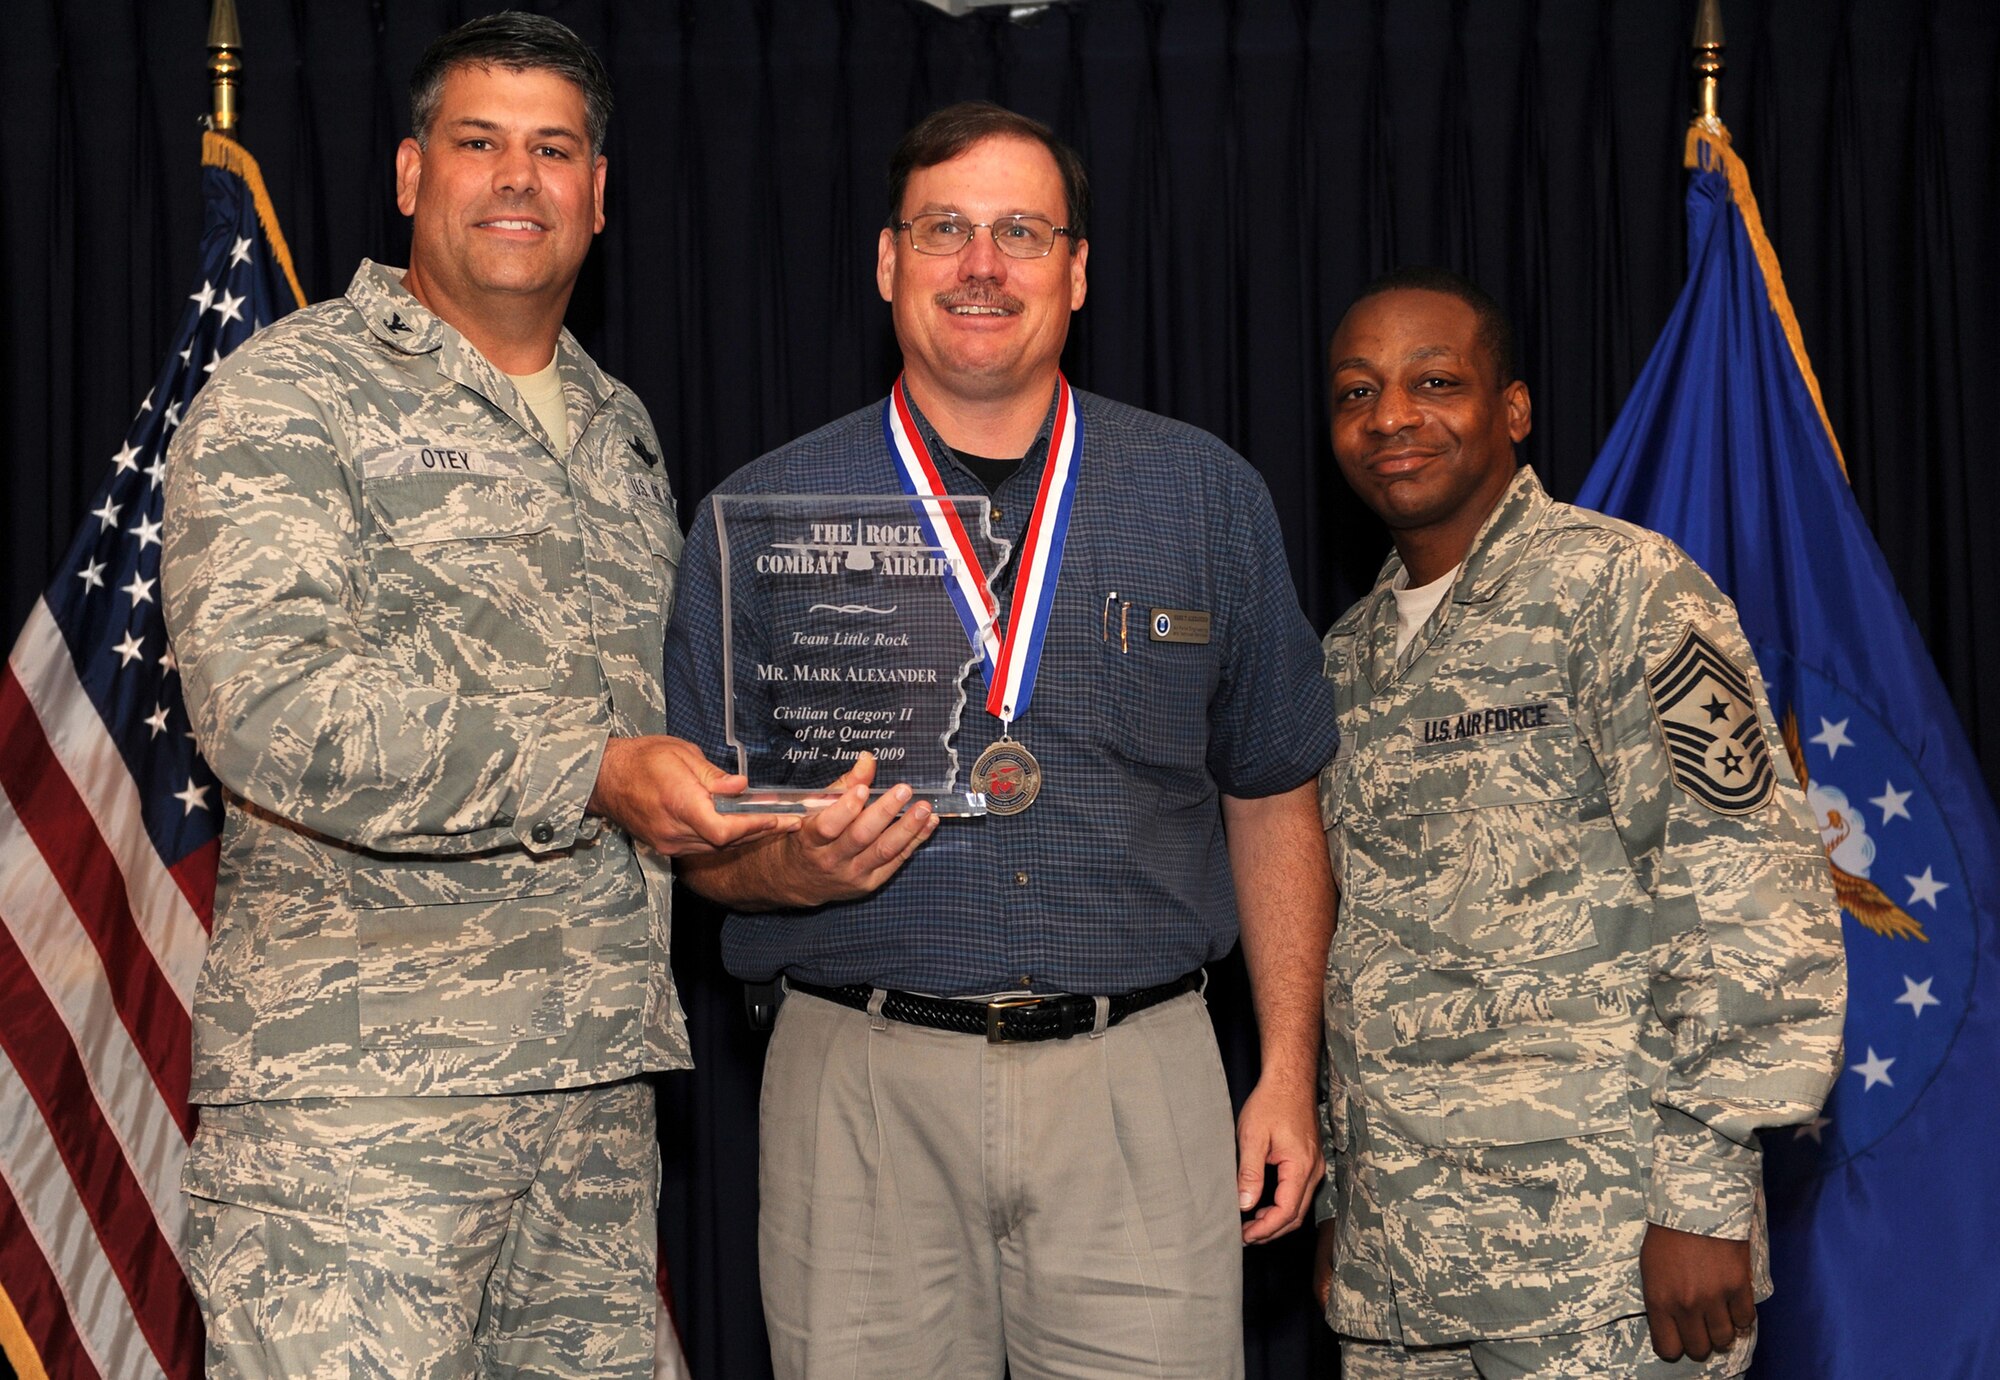 Col. Greg Otey, 19th Airlift Wing commander, and Chief Master Sgt. Anthony Brinkley, 19th Airlift Wing command chief, presents  Mark Alexander, 314th Maintenance Group, a quarterly award for civilian category 2 at Little Rock Air Force Base, Ark. July 30. (U. S. Air Force photo by Senior Airman Jim Araos)